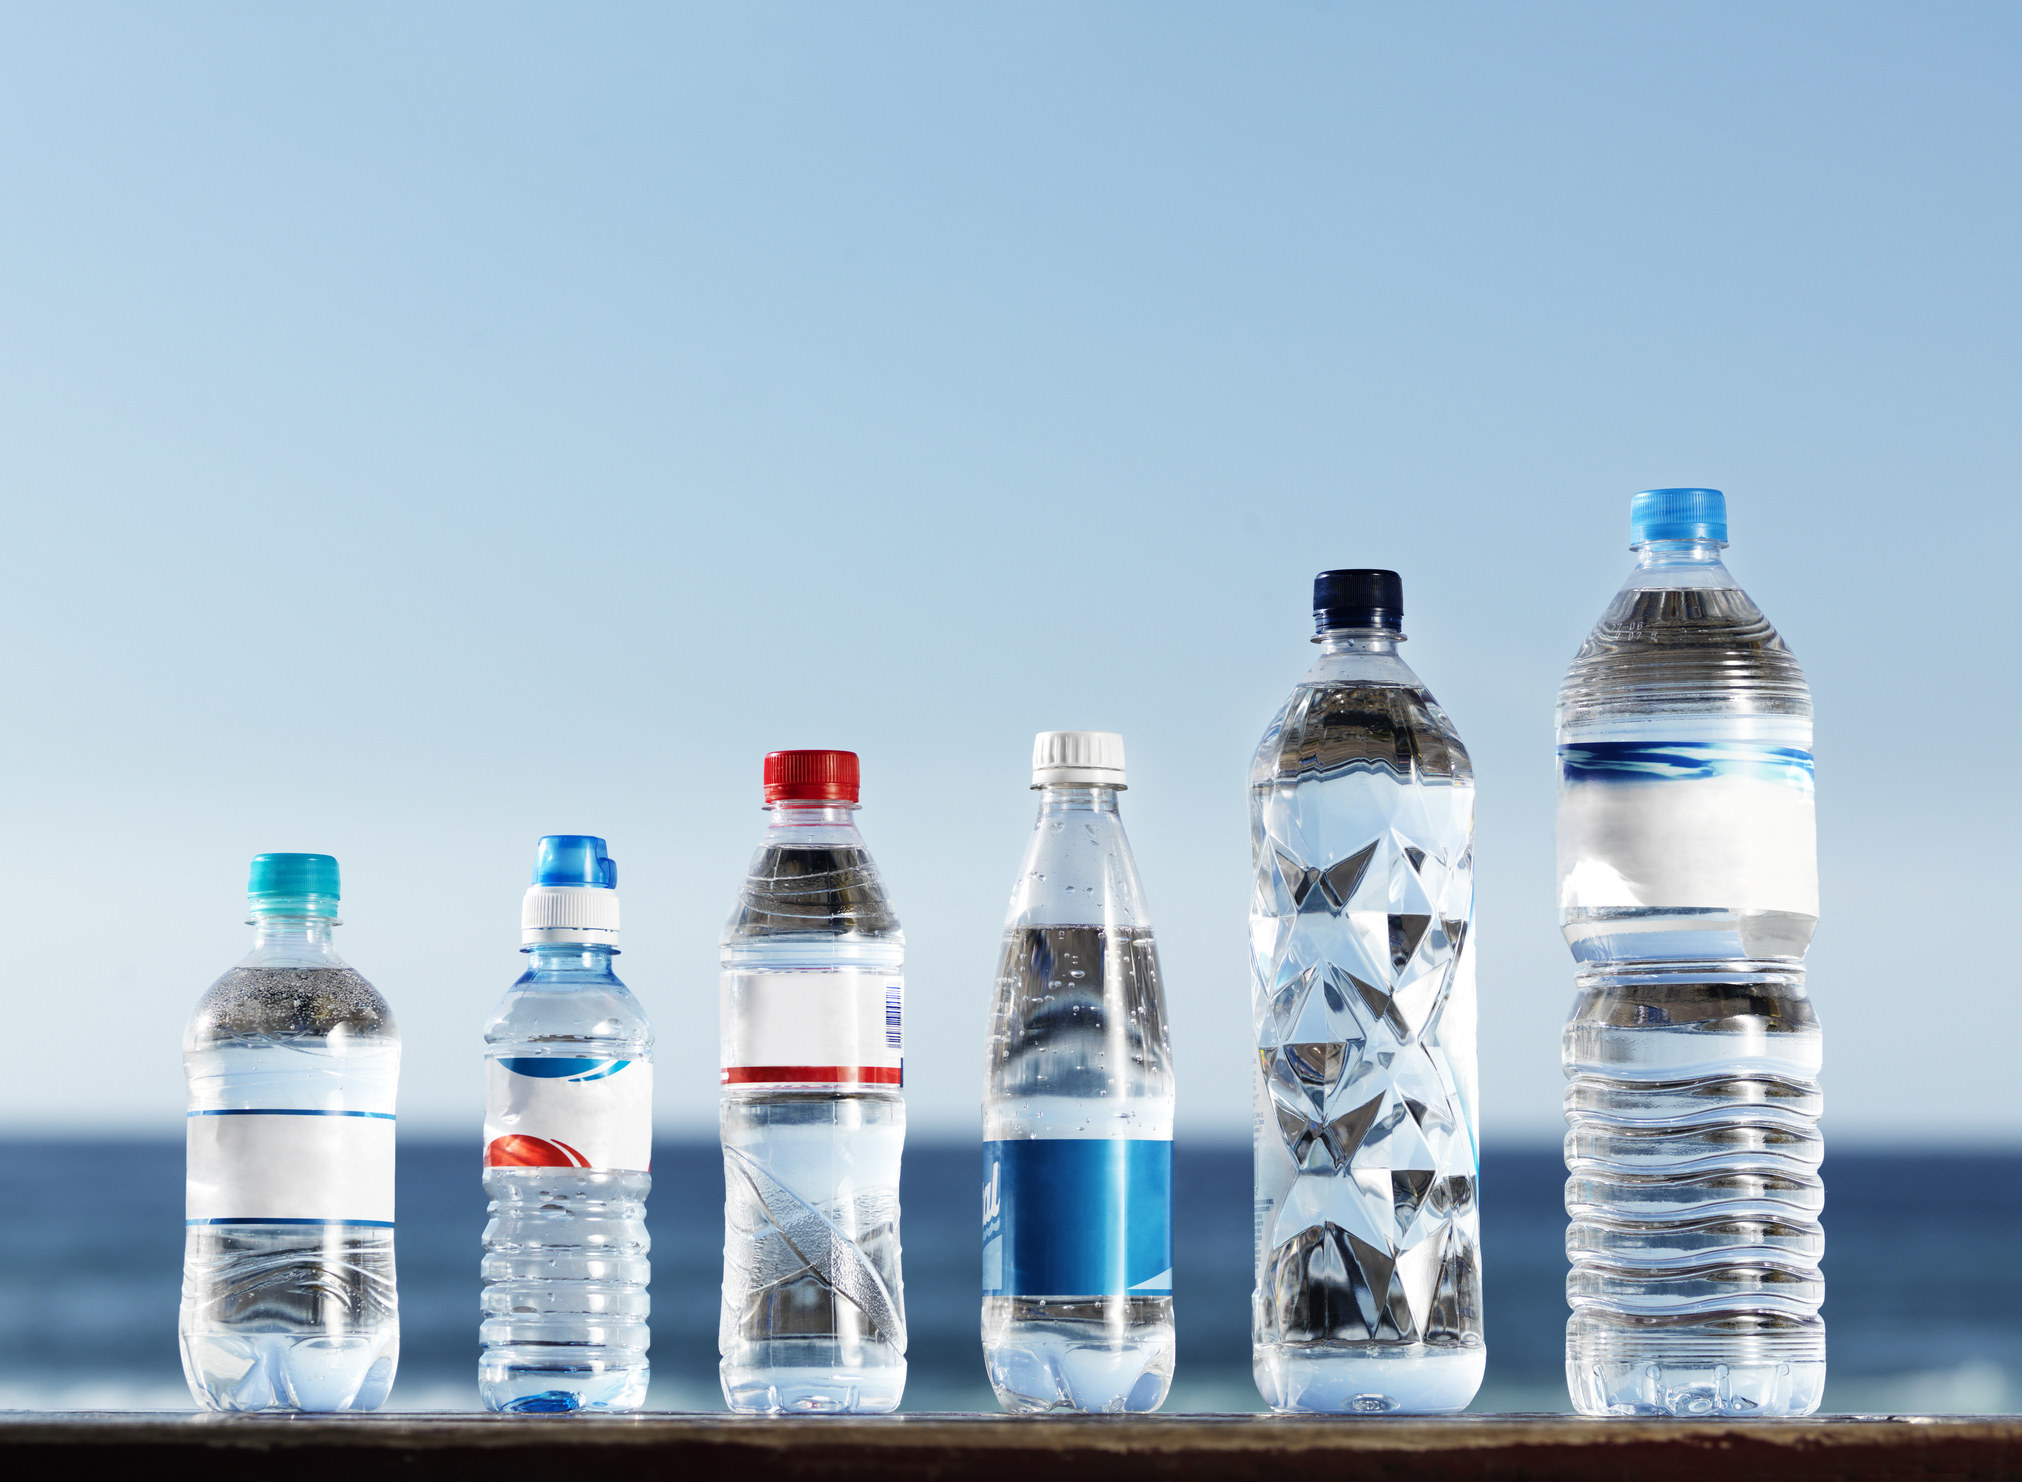 A row of plastic water bottles from different companies